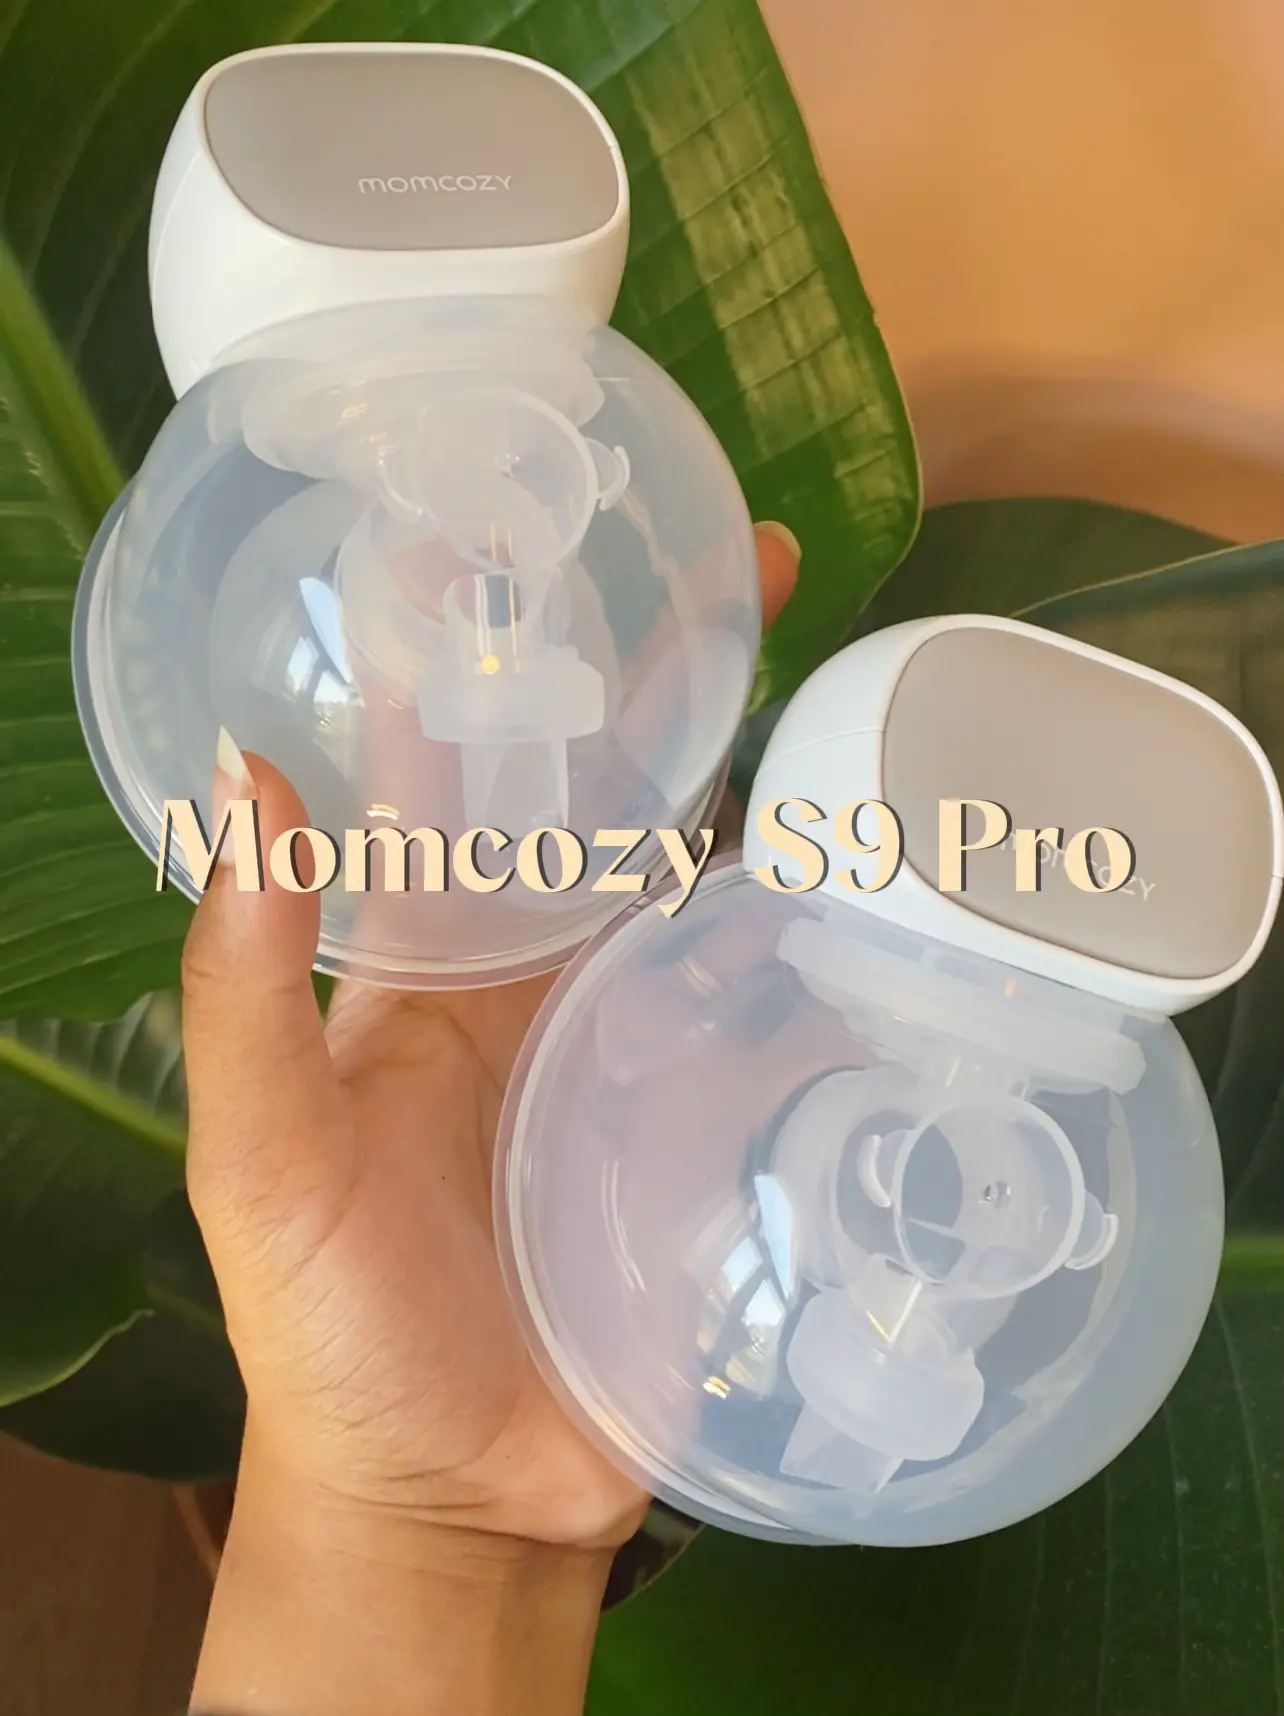 New momcozy wearable breast pump 😍, Gallery posted by Bailey Schmidt